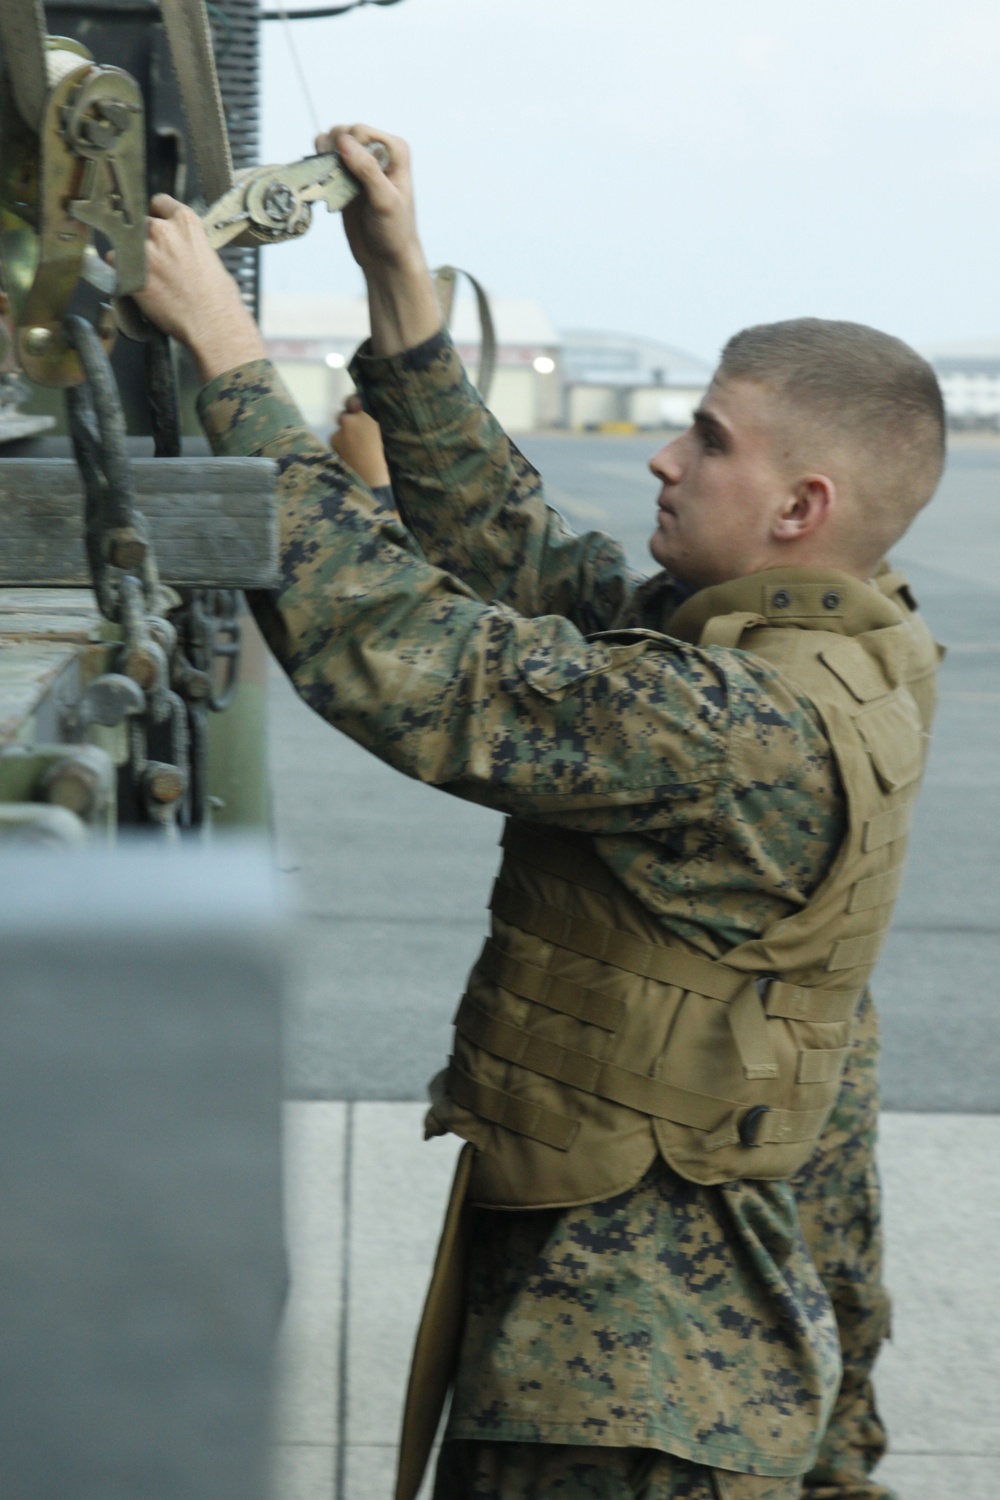 MWSS-171 mobilization exercises improve expeditionary abilities